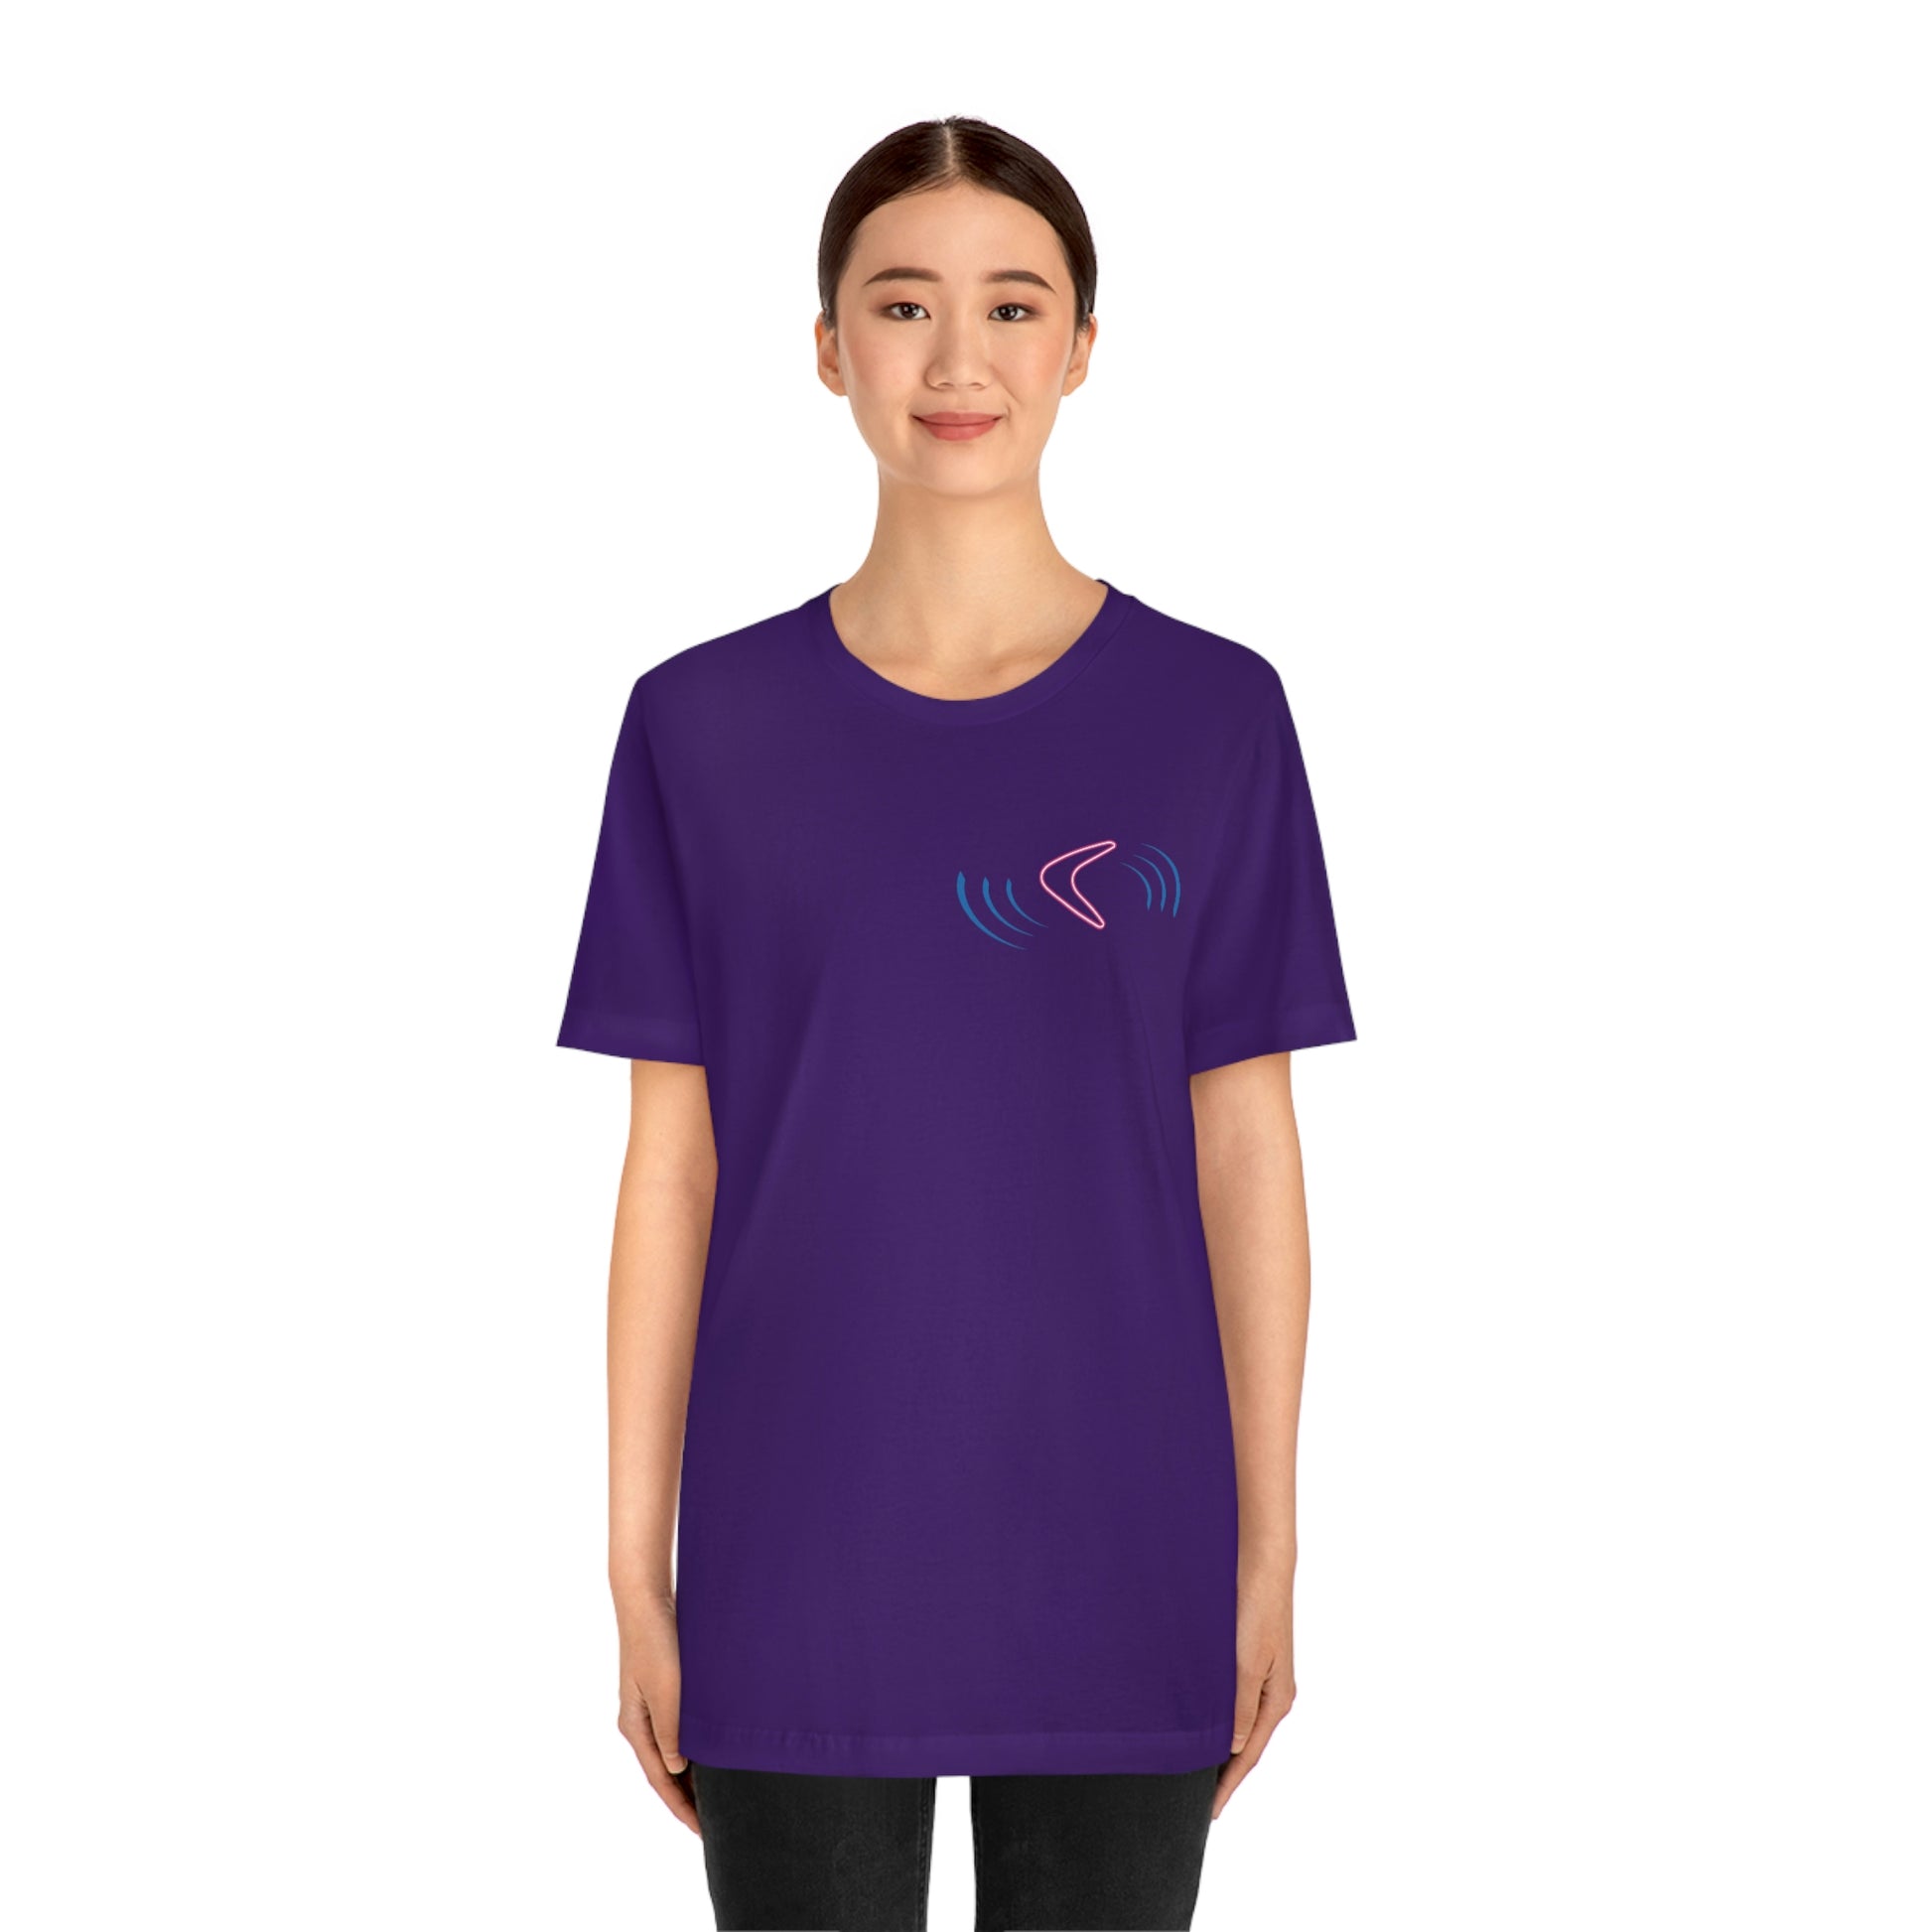 FLYING BOOMERANG  - Purple T-Shirt with vibrant, dynamic flying boomerang design. Taken from the TEQNEON Radioactive collection.